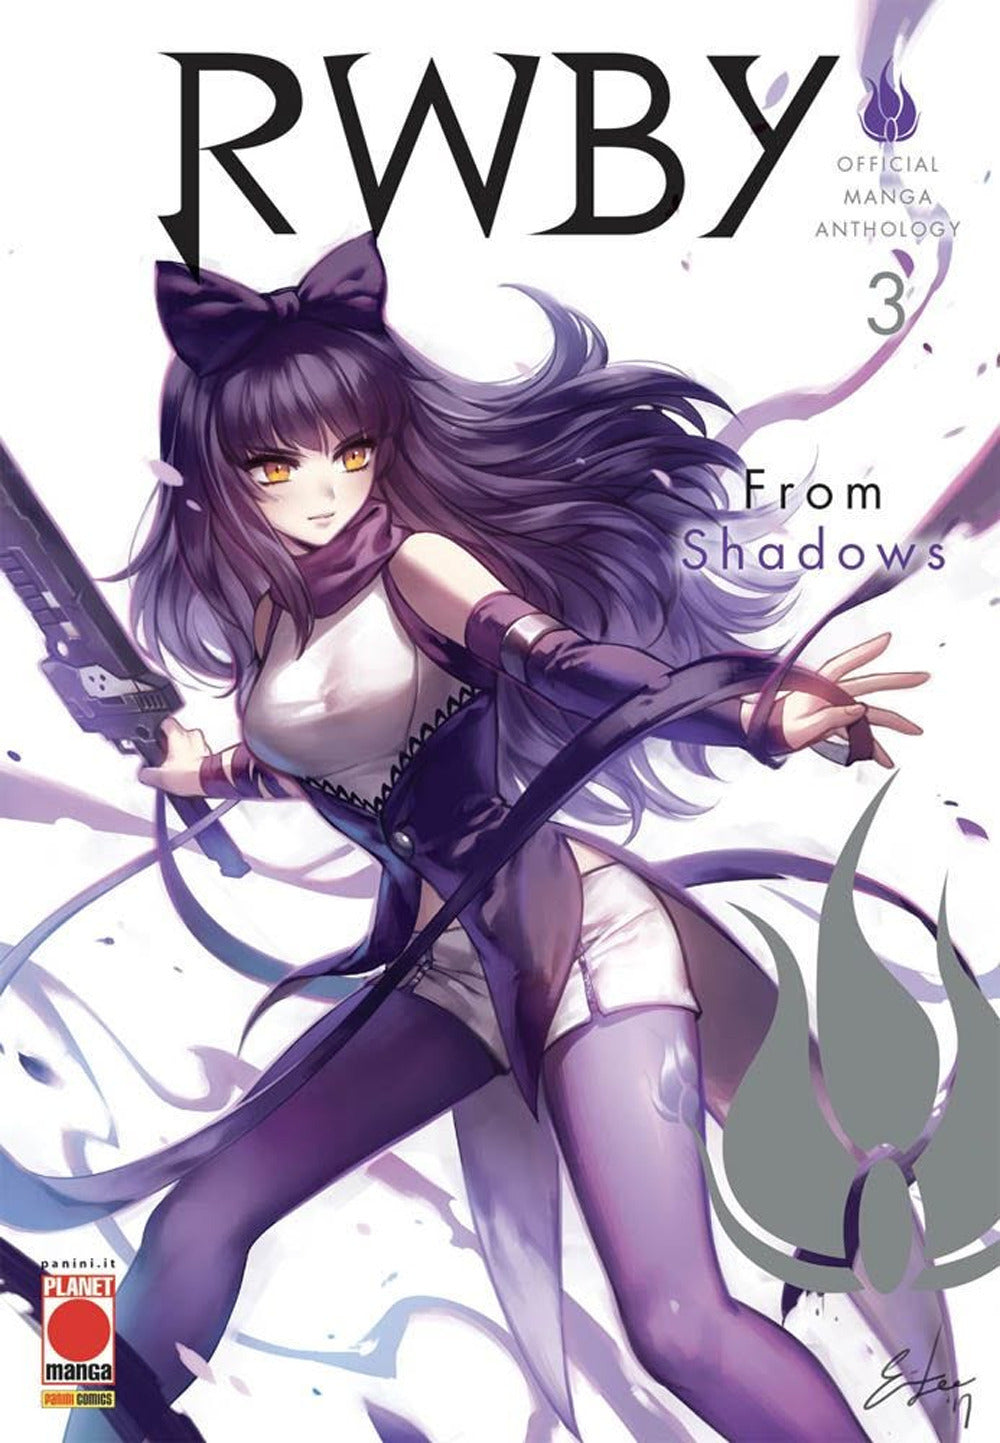 RWBY. Official manga anthology. Vol. 3: From shadows.